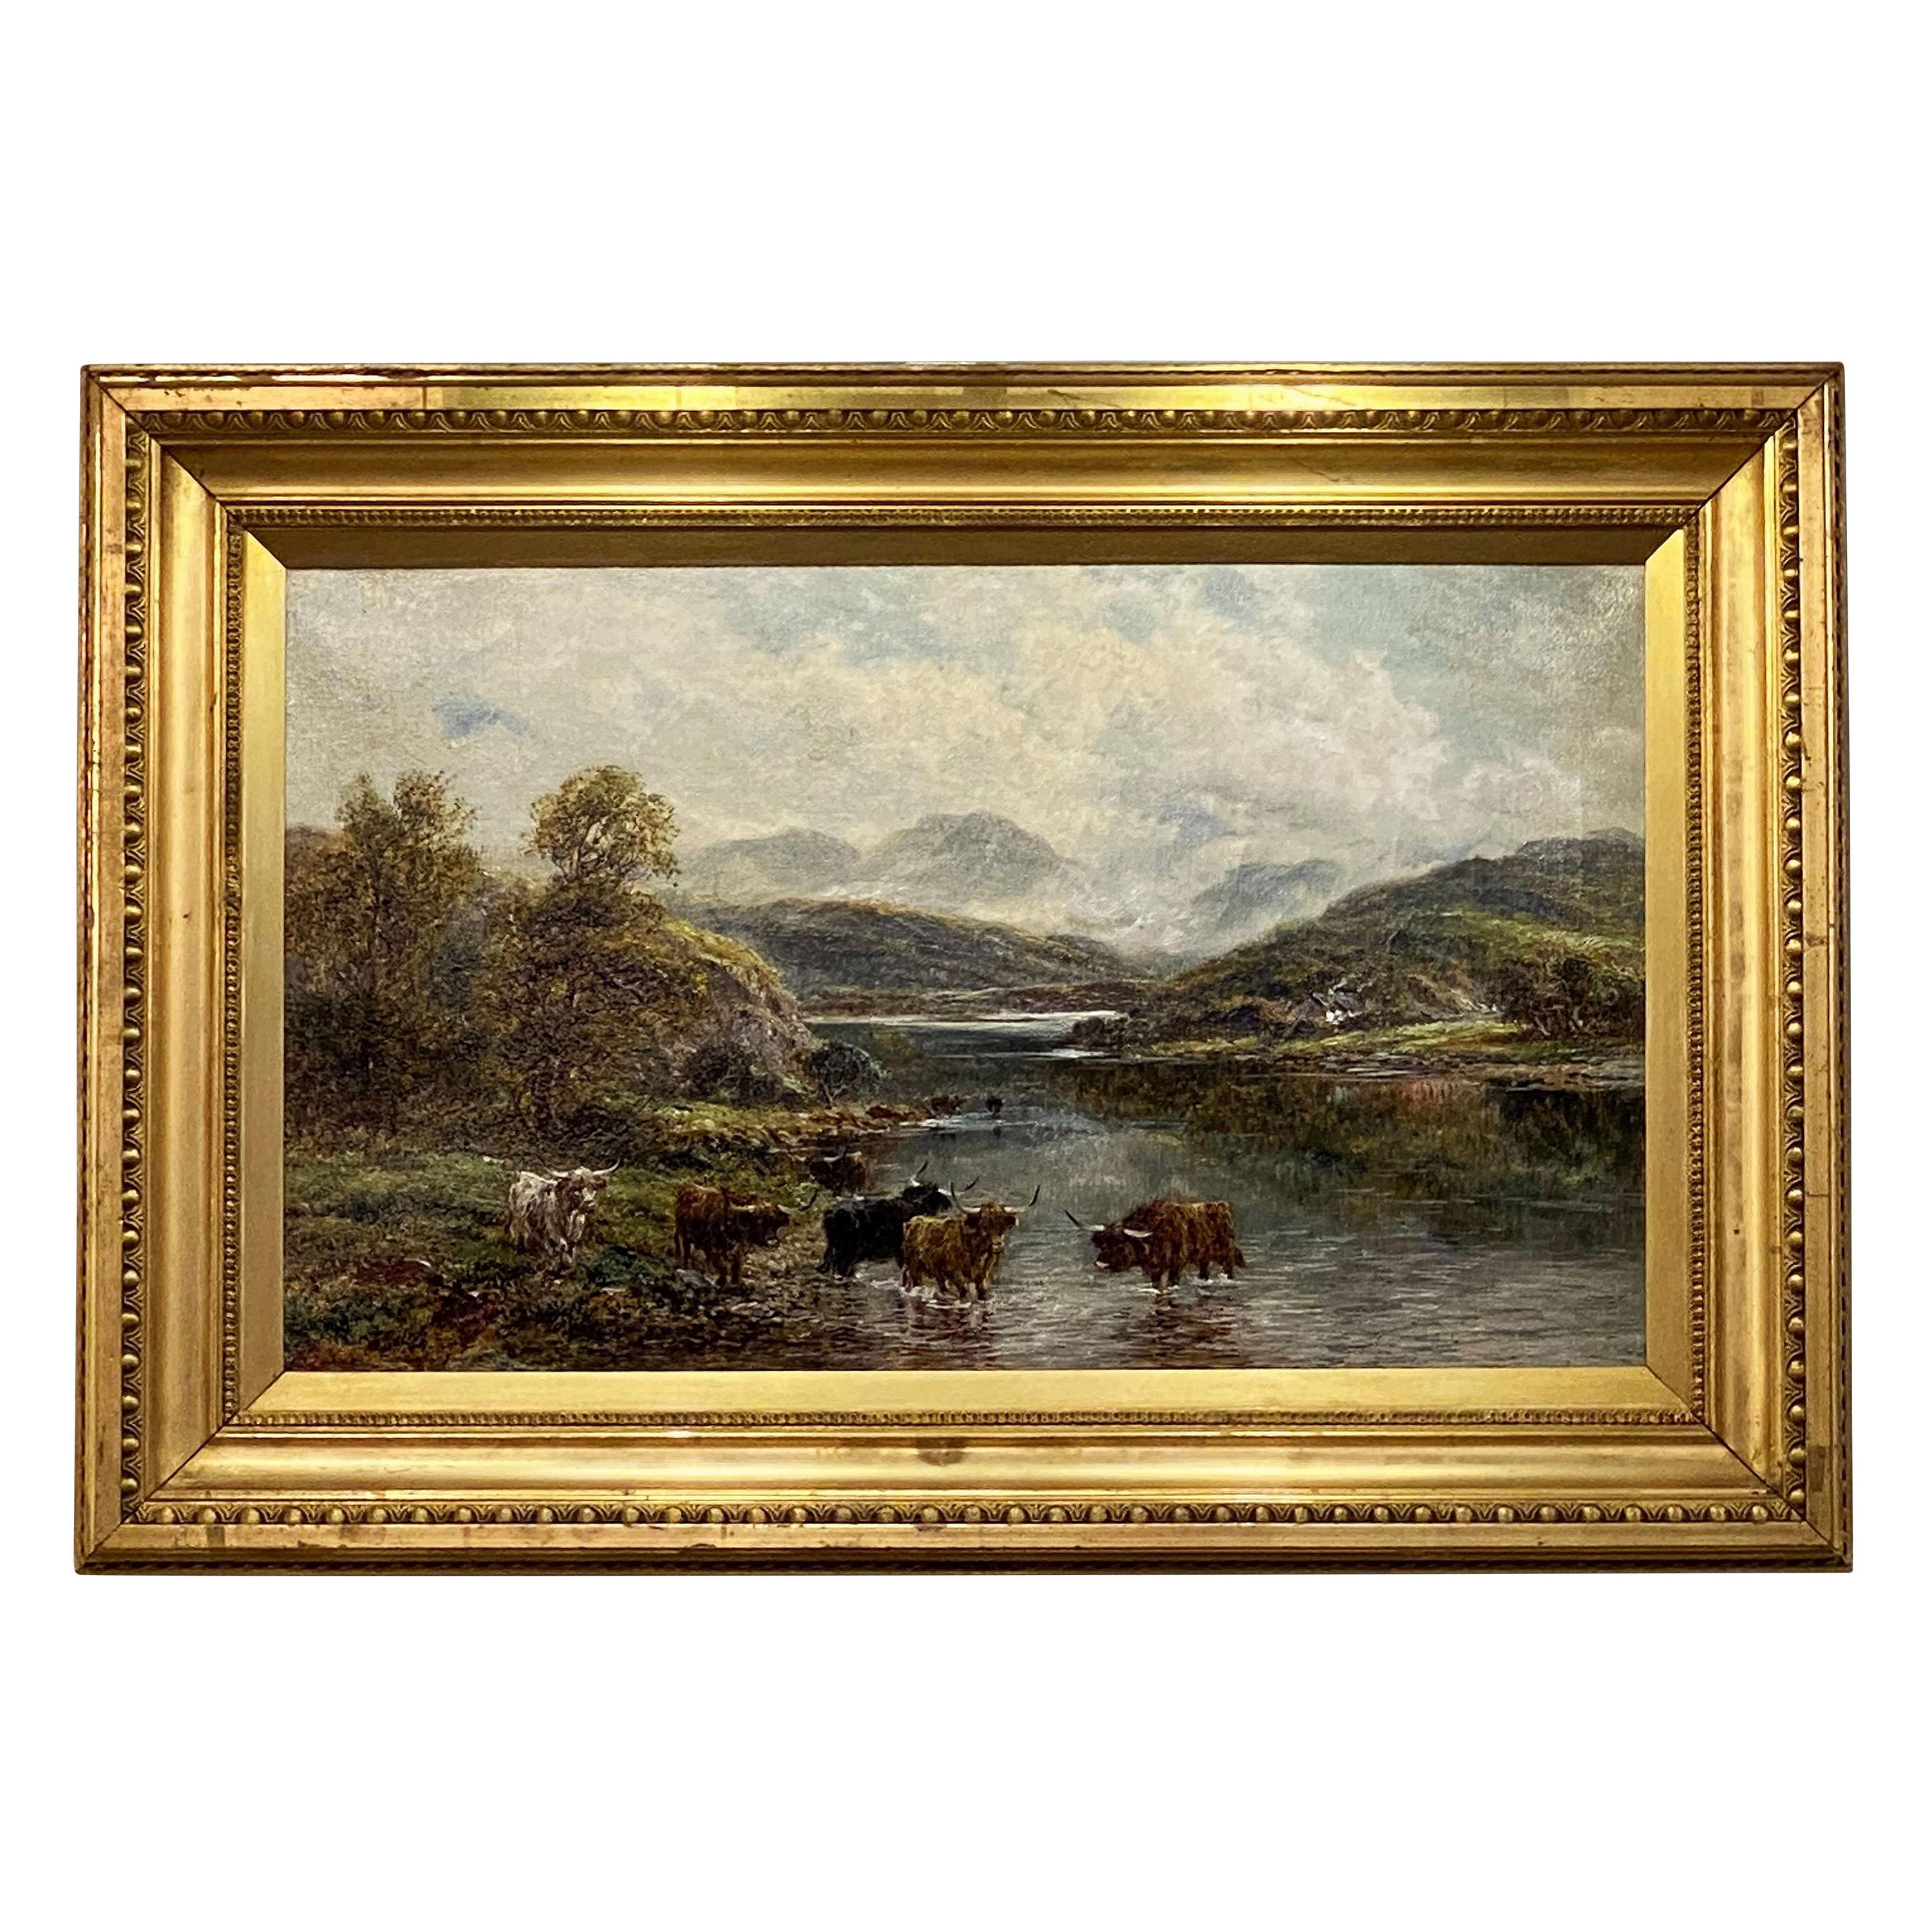 Framed and Signed English Oil Painting of River Landscape by Andrew Lennox